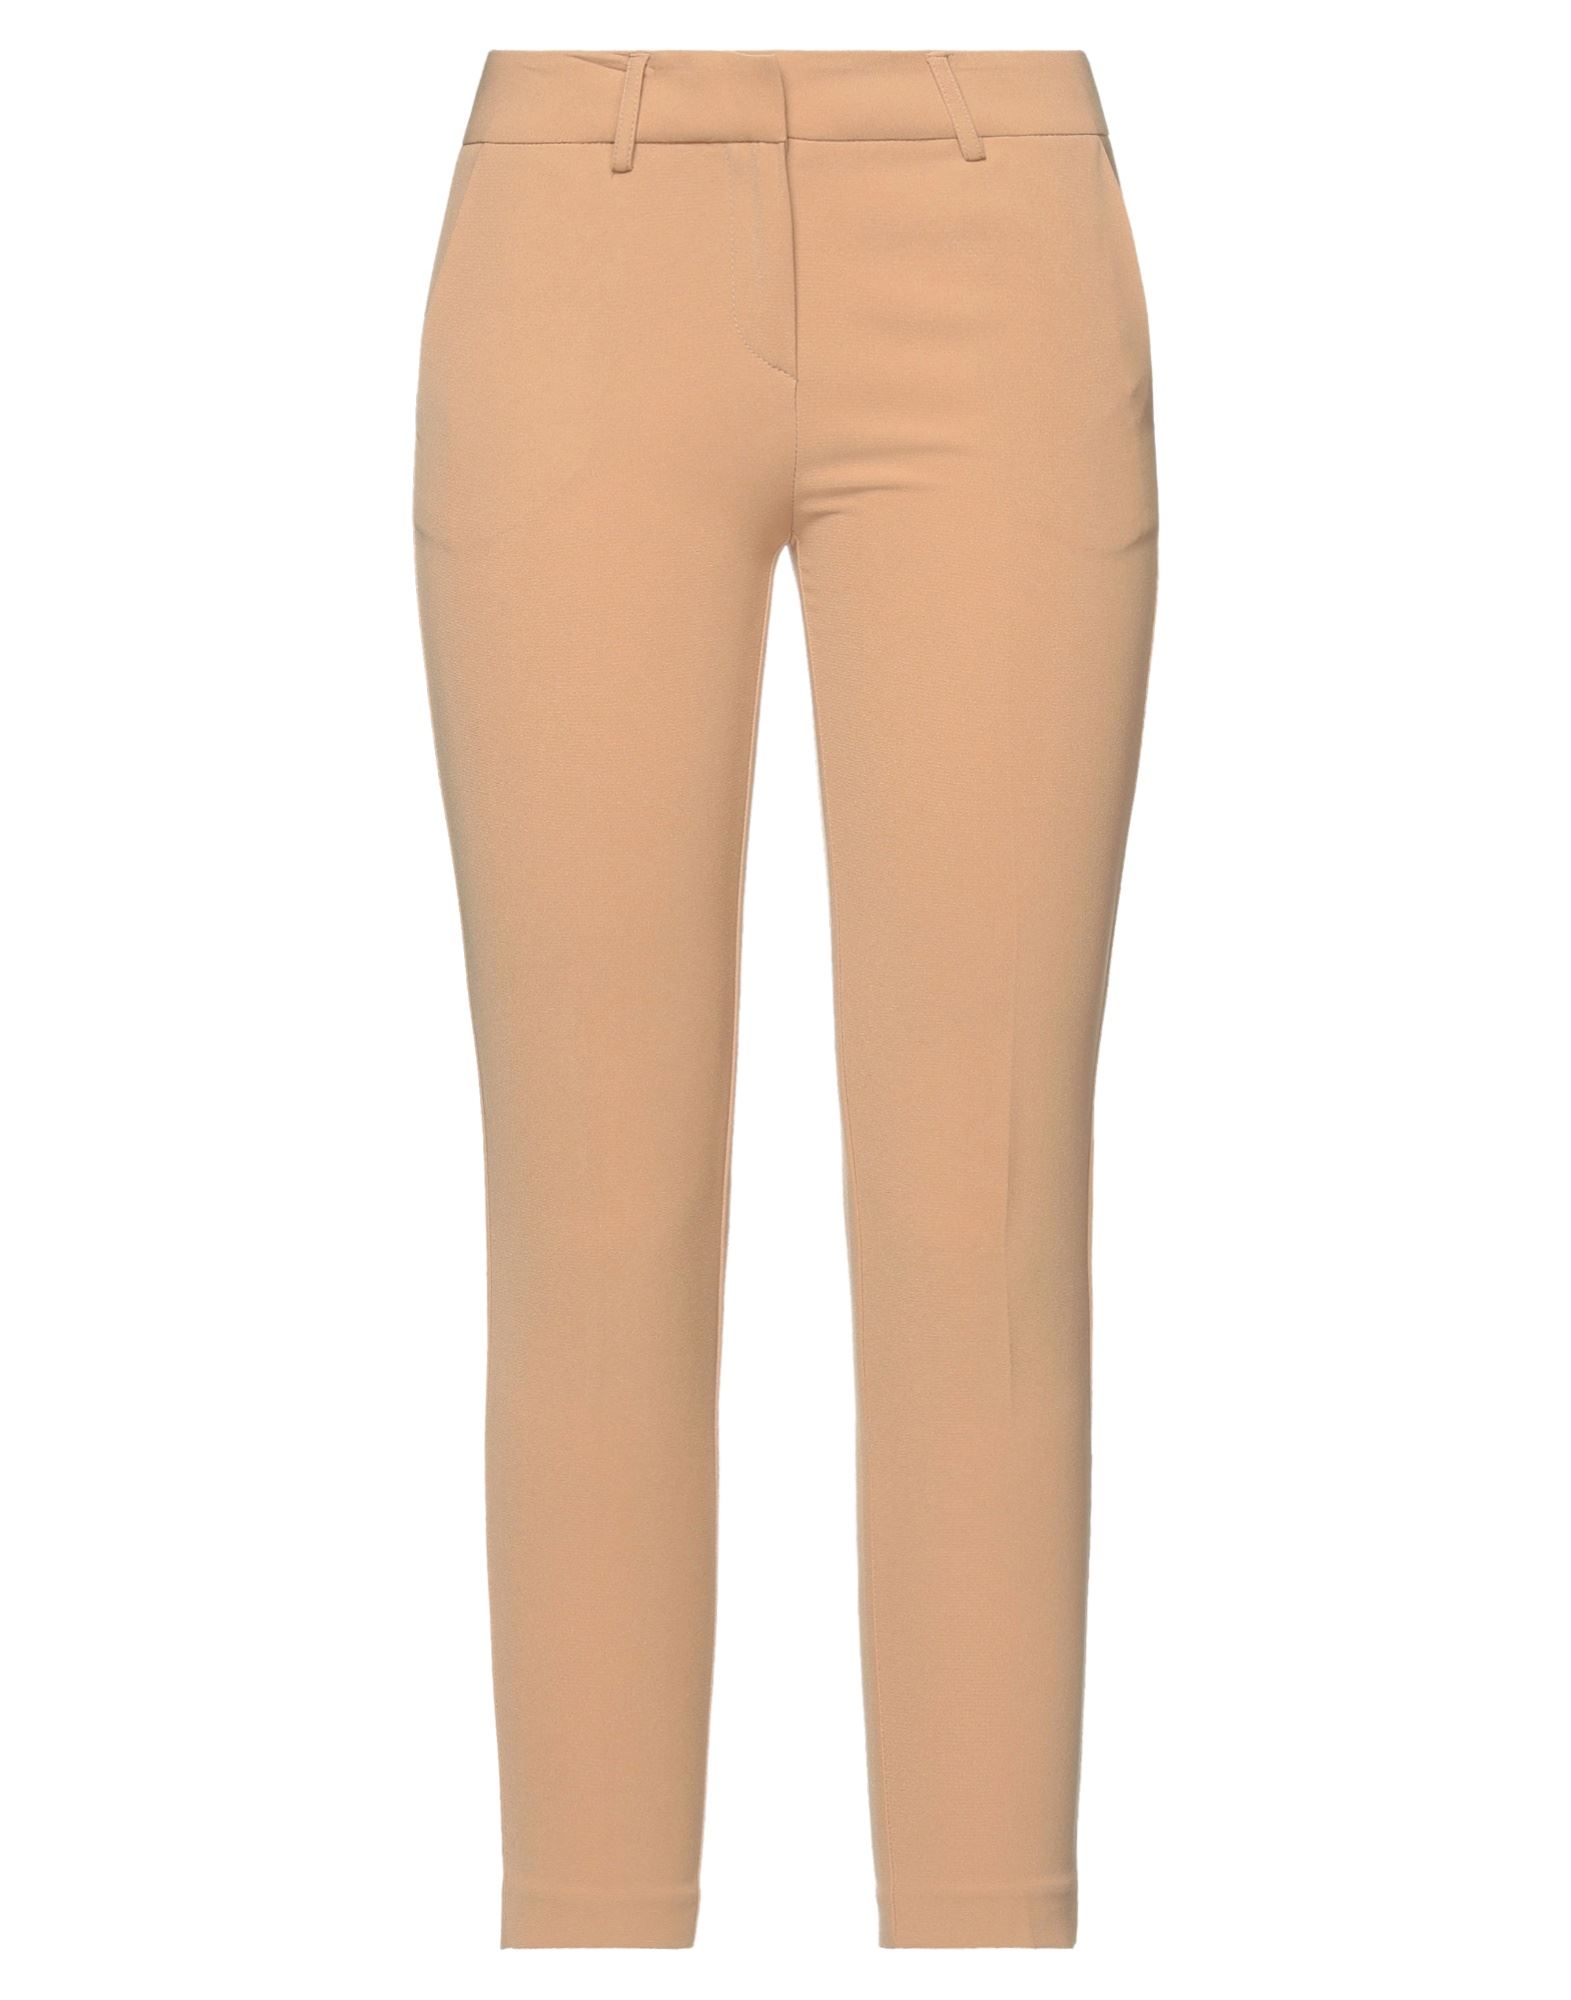 Space Simona Corsellini Cropped Pants In Beige